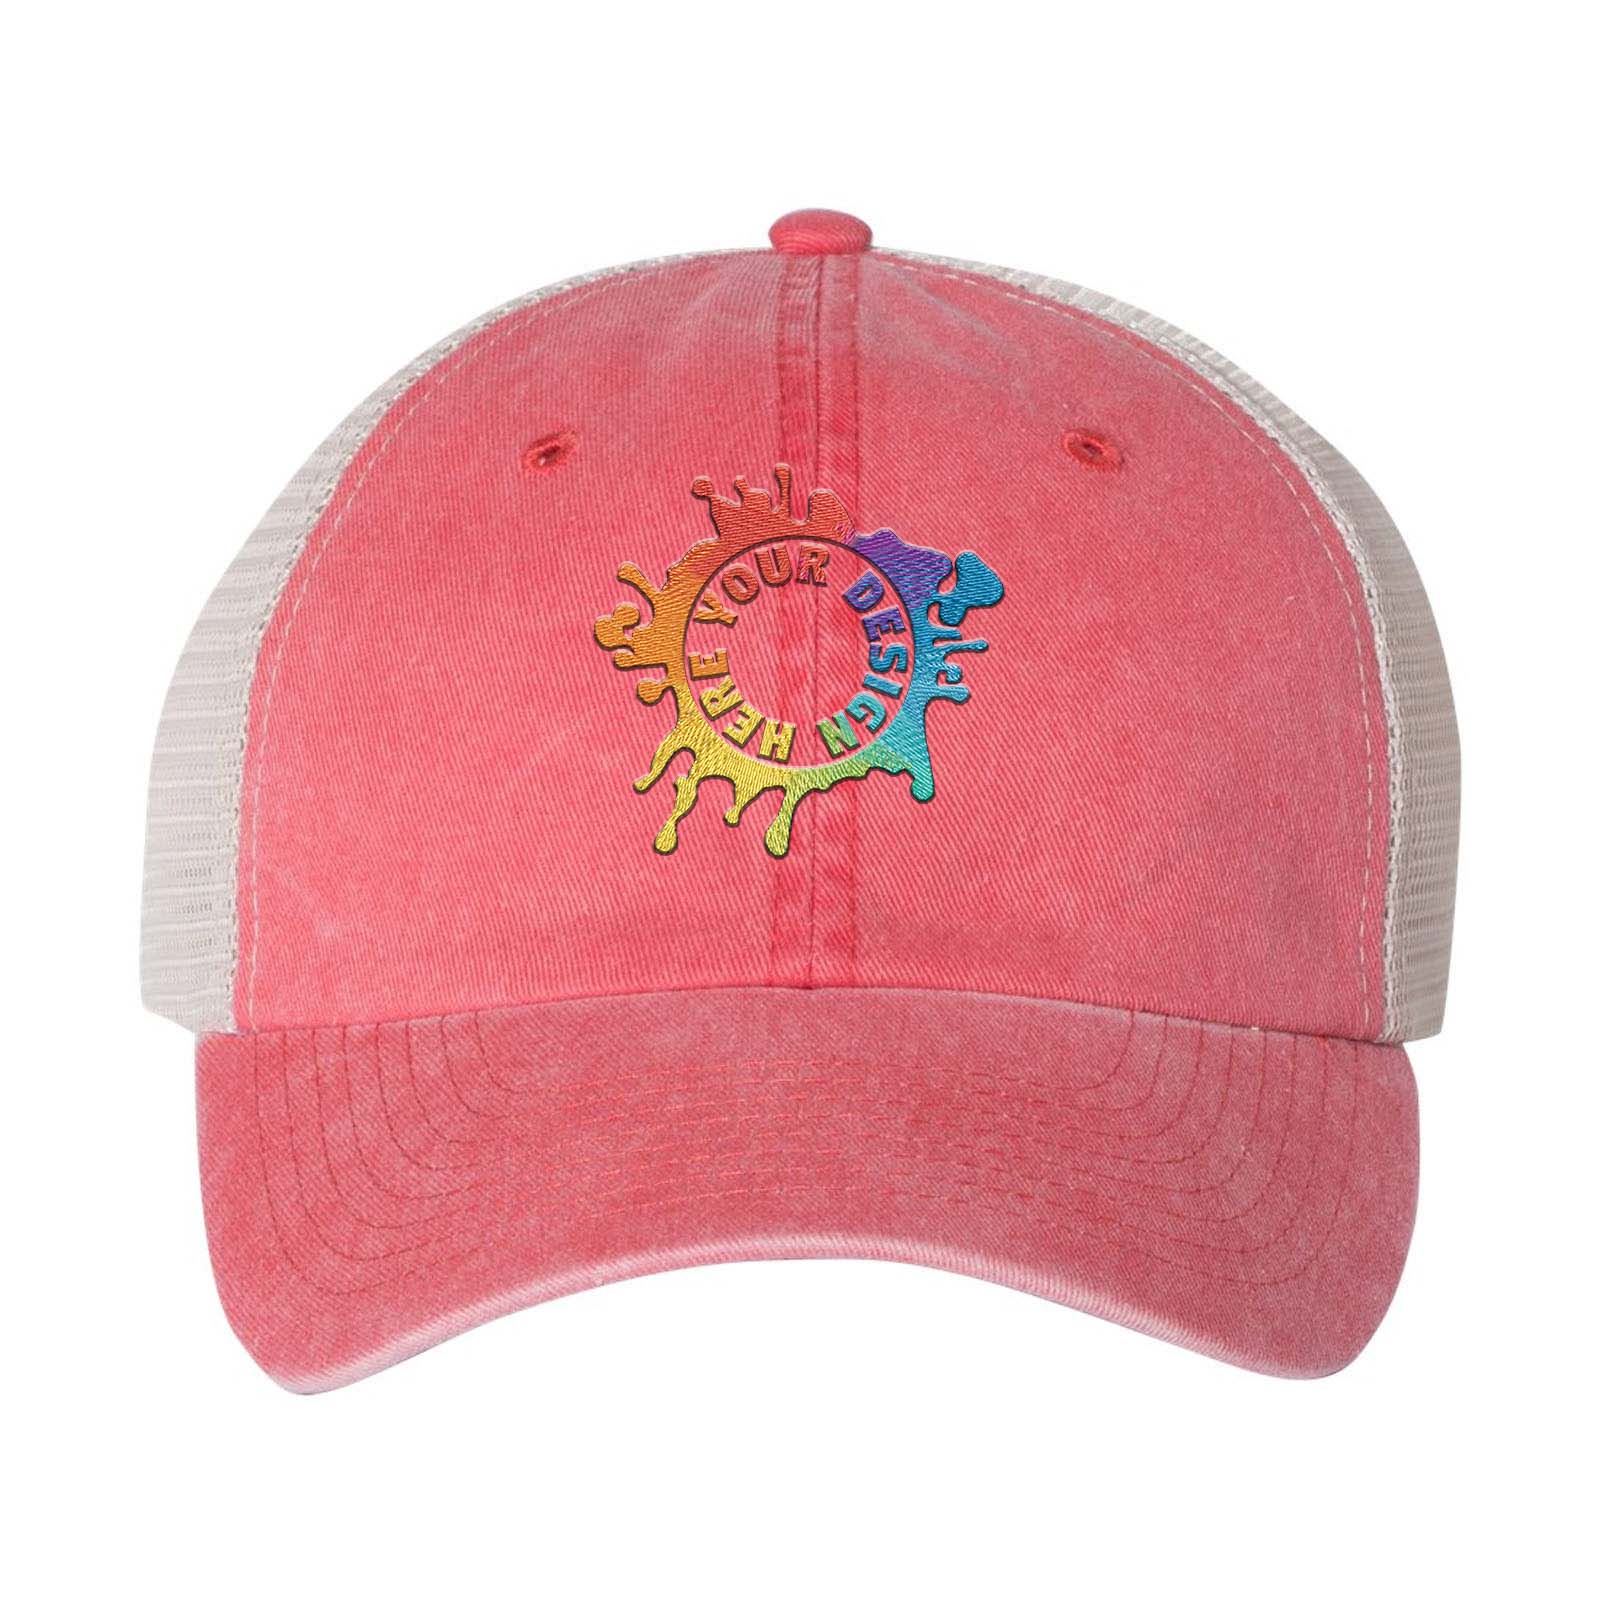 Embroidered Sportsman Pigment-Dyed Trucker Cap - Mato & Hash